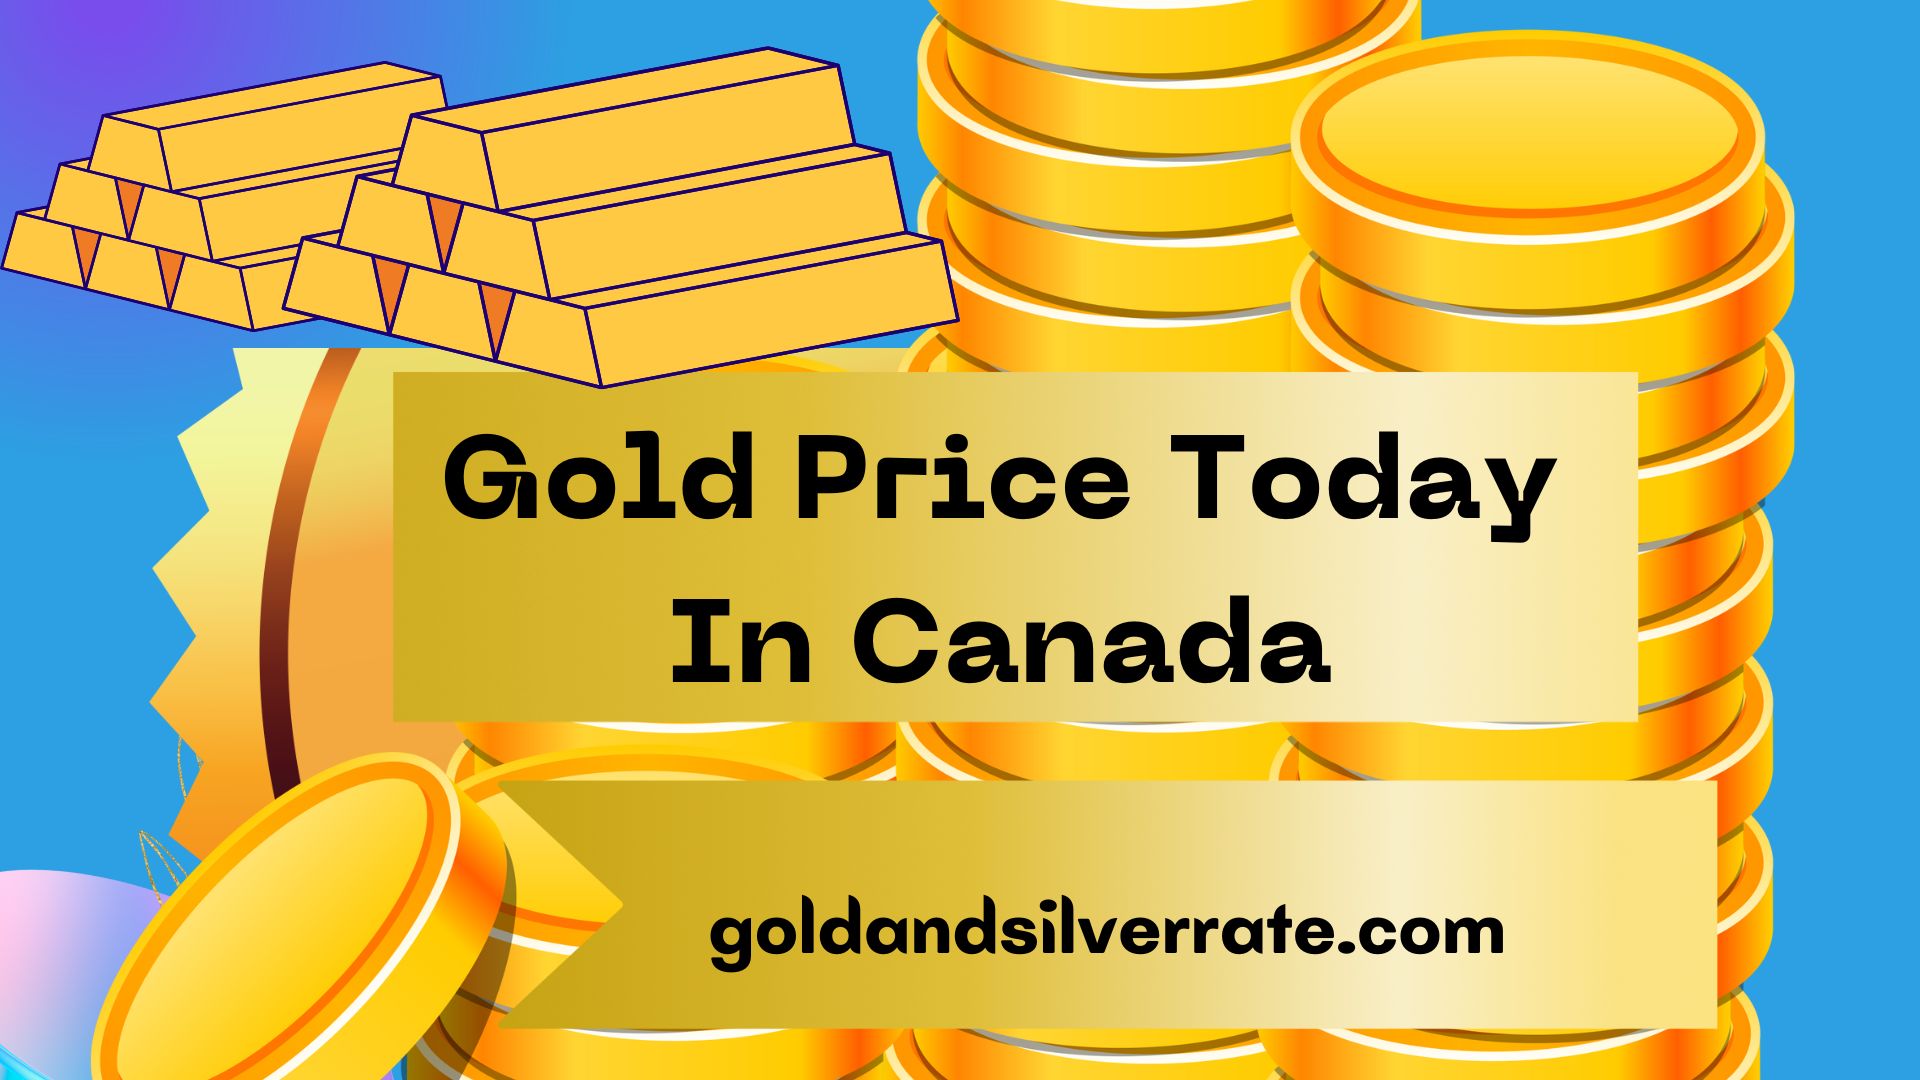 GOLD PRICE TODAY IN CANADA